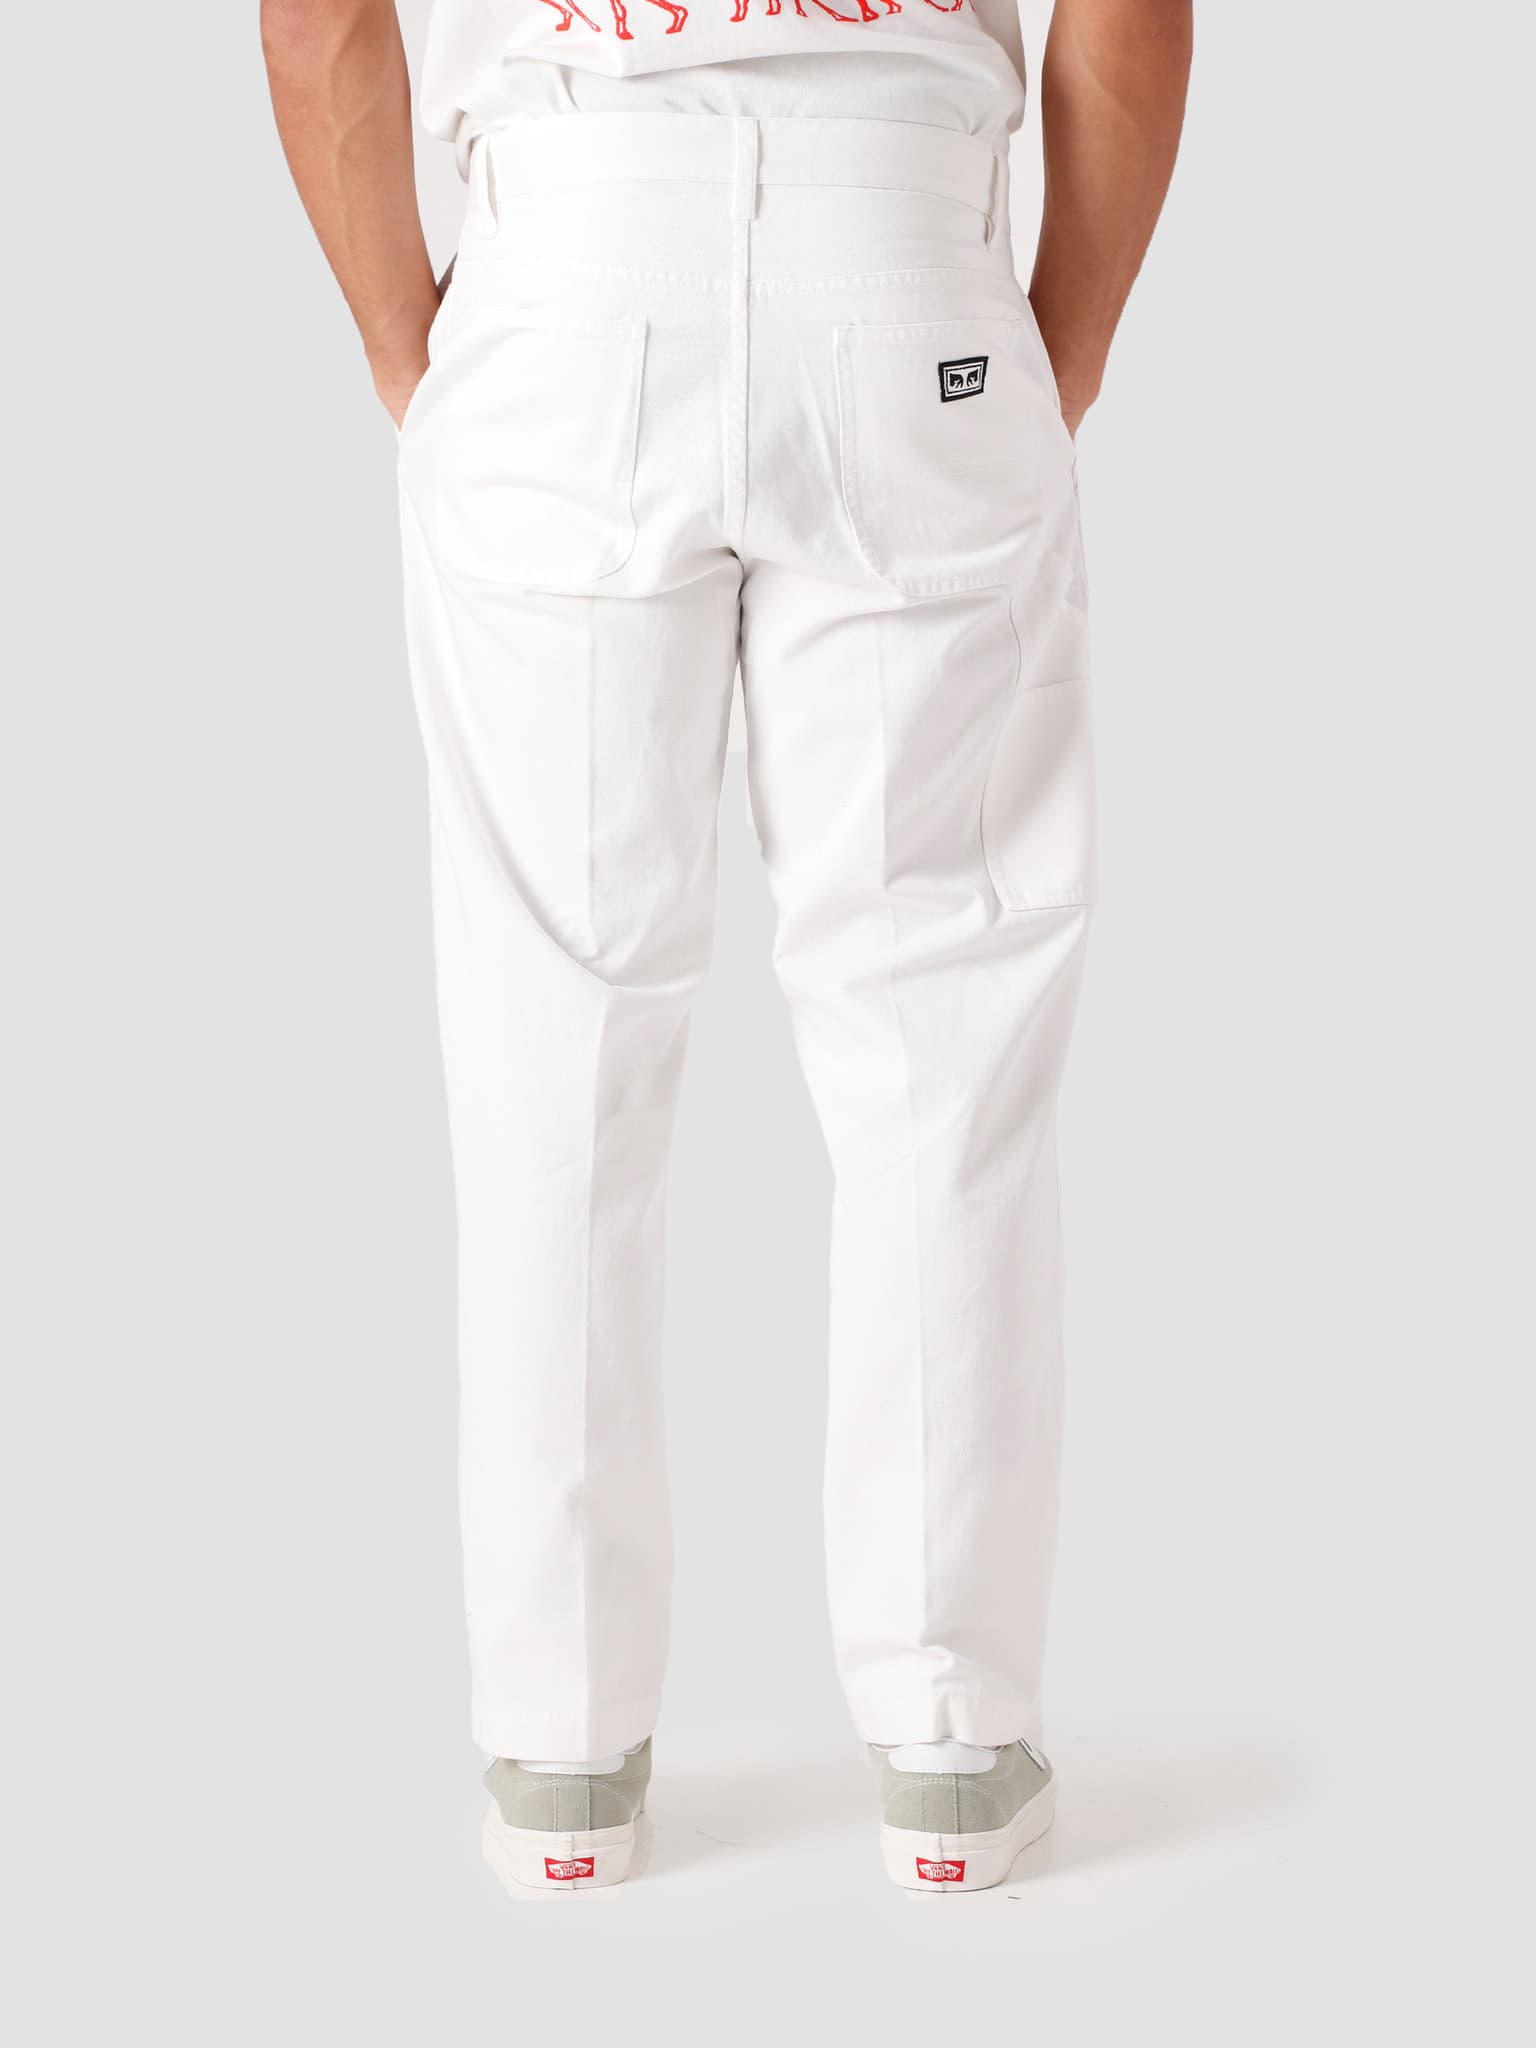 EIGHTYFIVE CARPENTER - Relaxed fit jeans - off white/off-white -  Zalando.co.uk